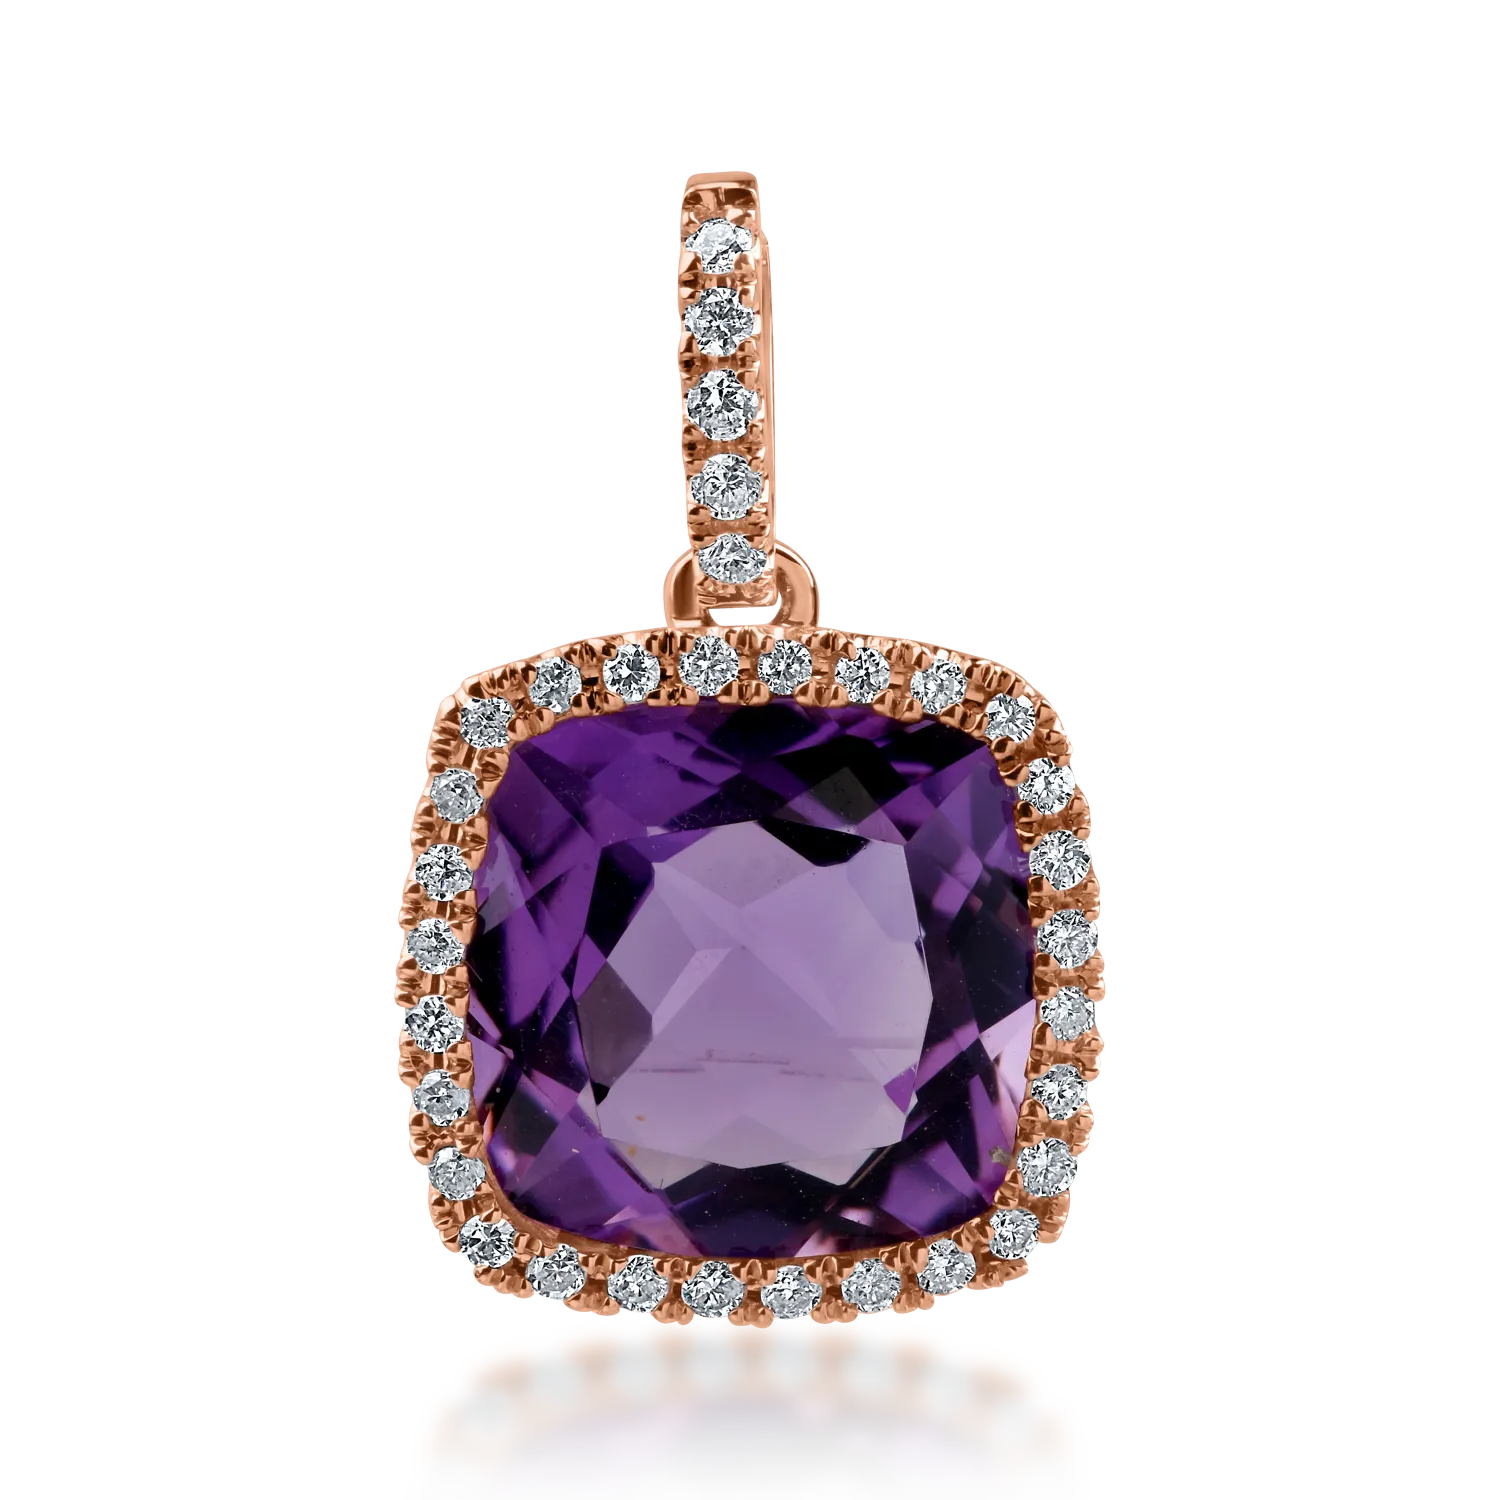 Rose gold pendant with 3.4ct amethyst and 0.16ct diamonds